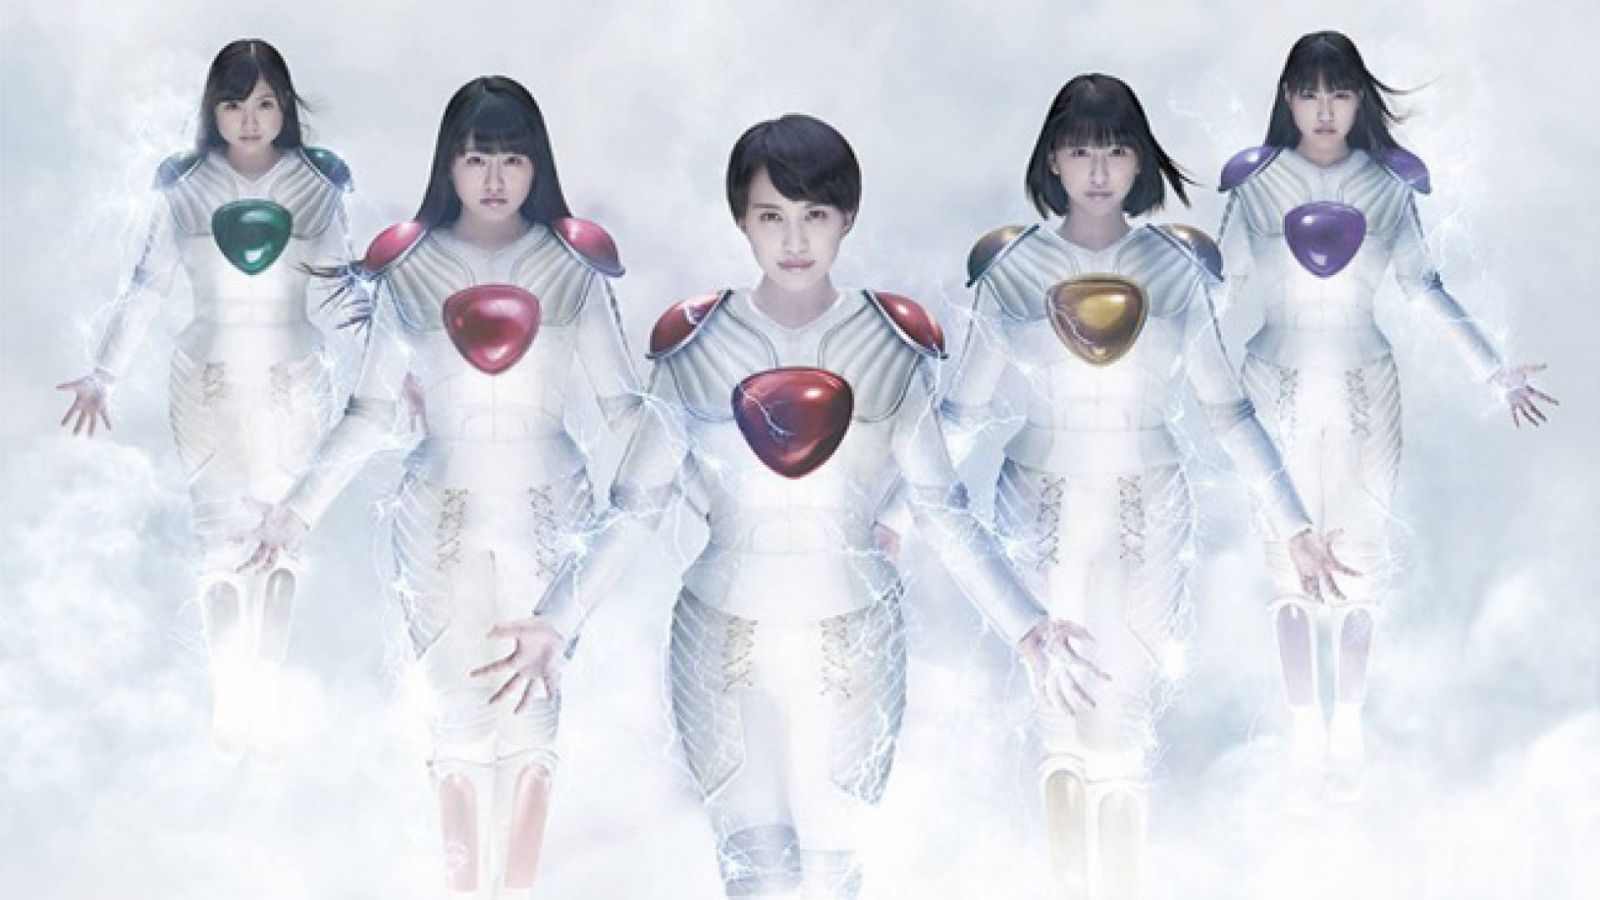 Momoiro Clover Z – Pledge of Z © STARDUST PROMOTION INC, All rights reserved.